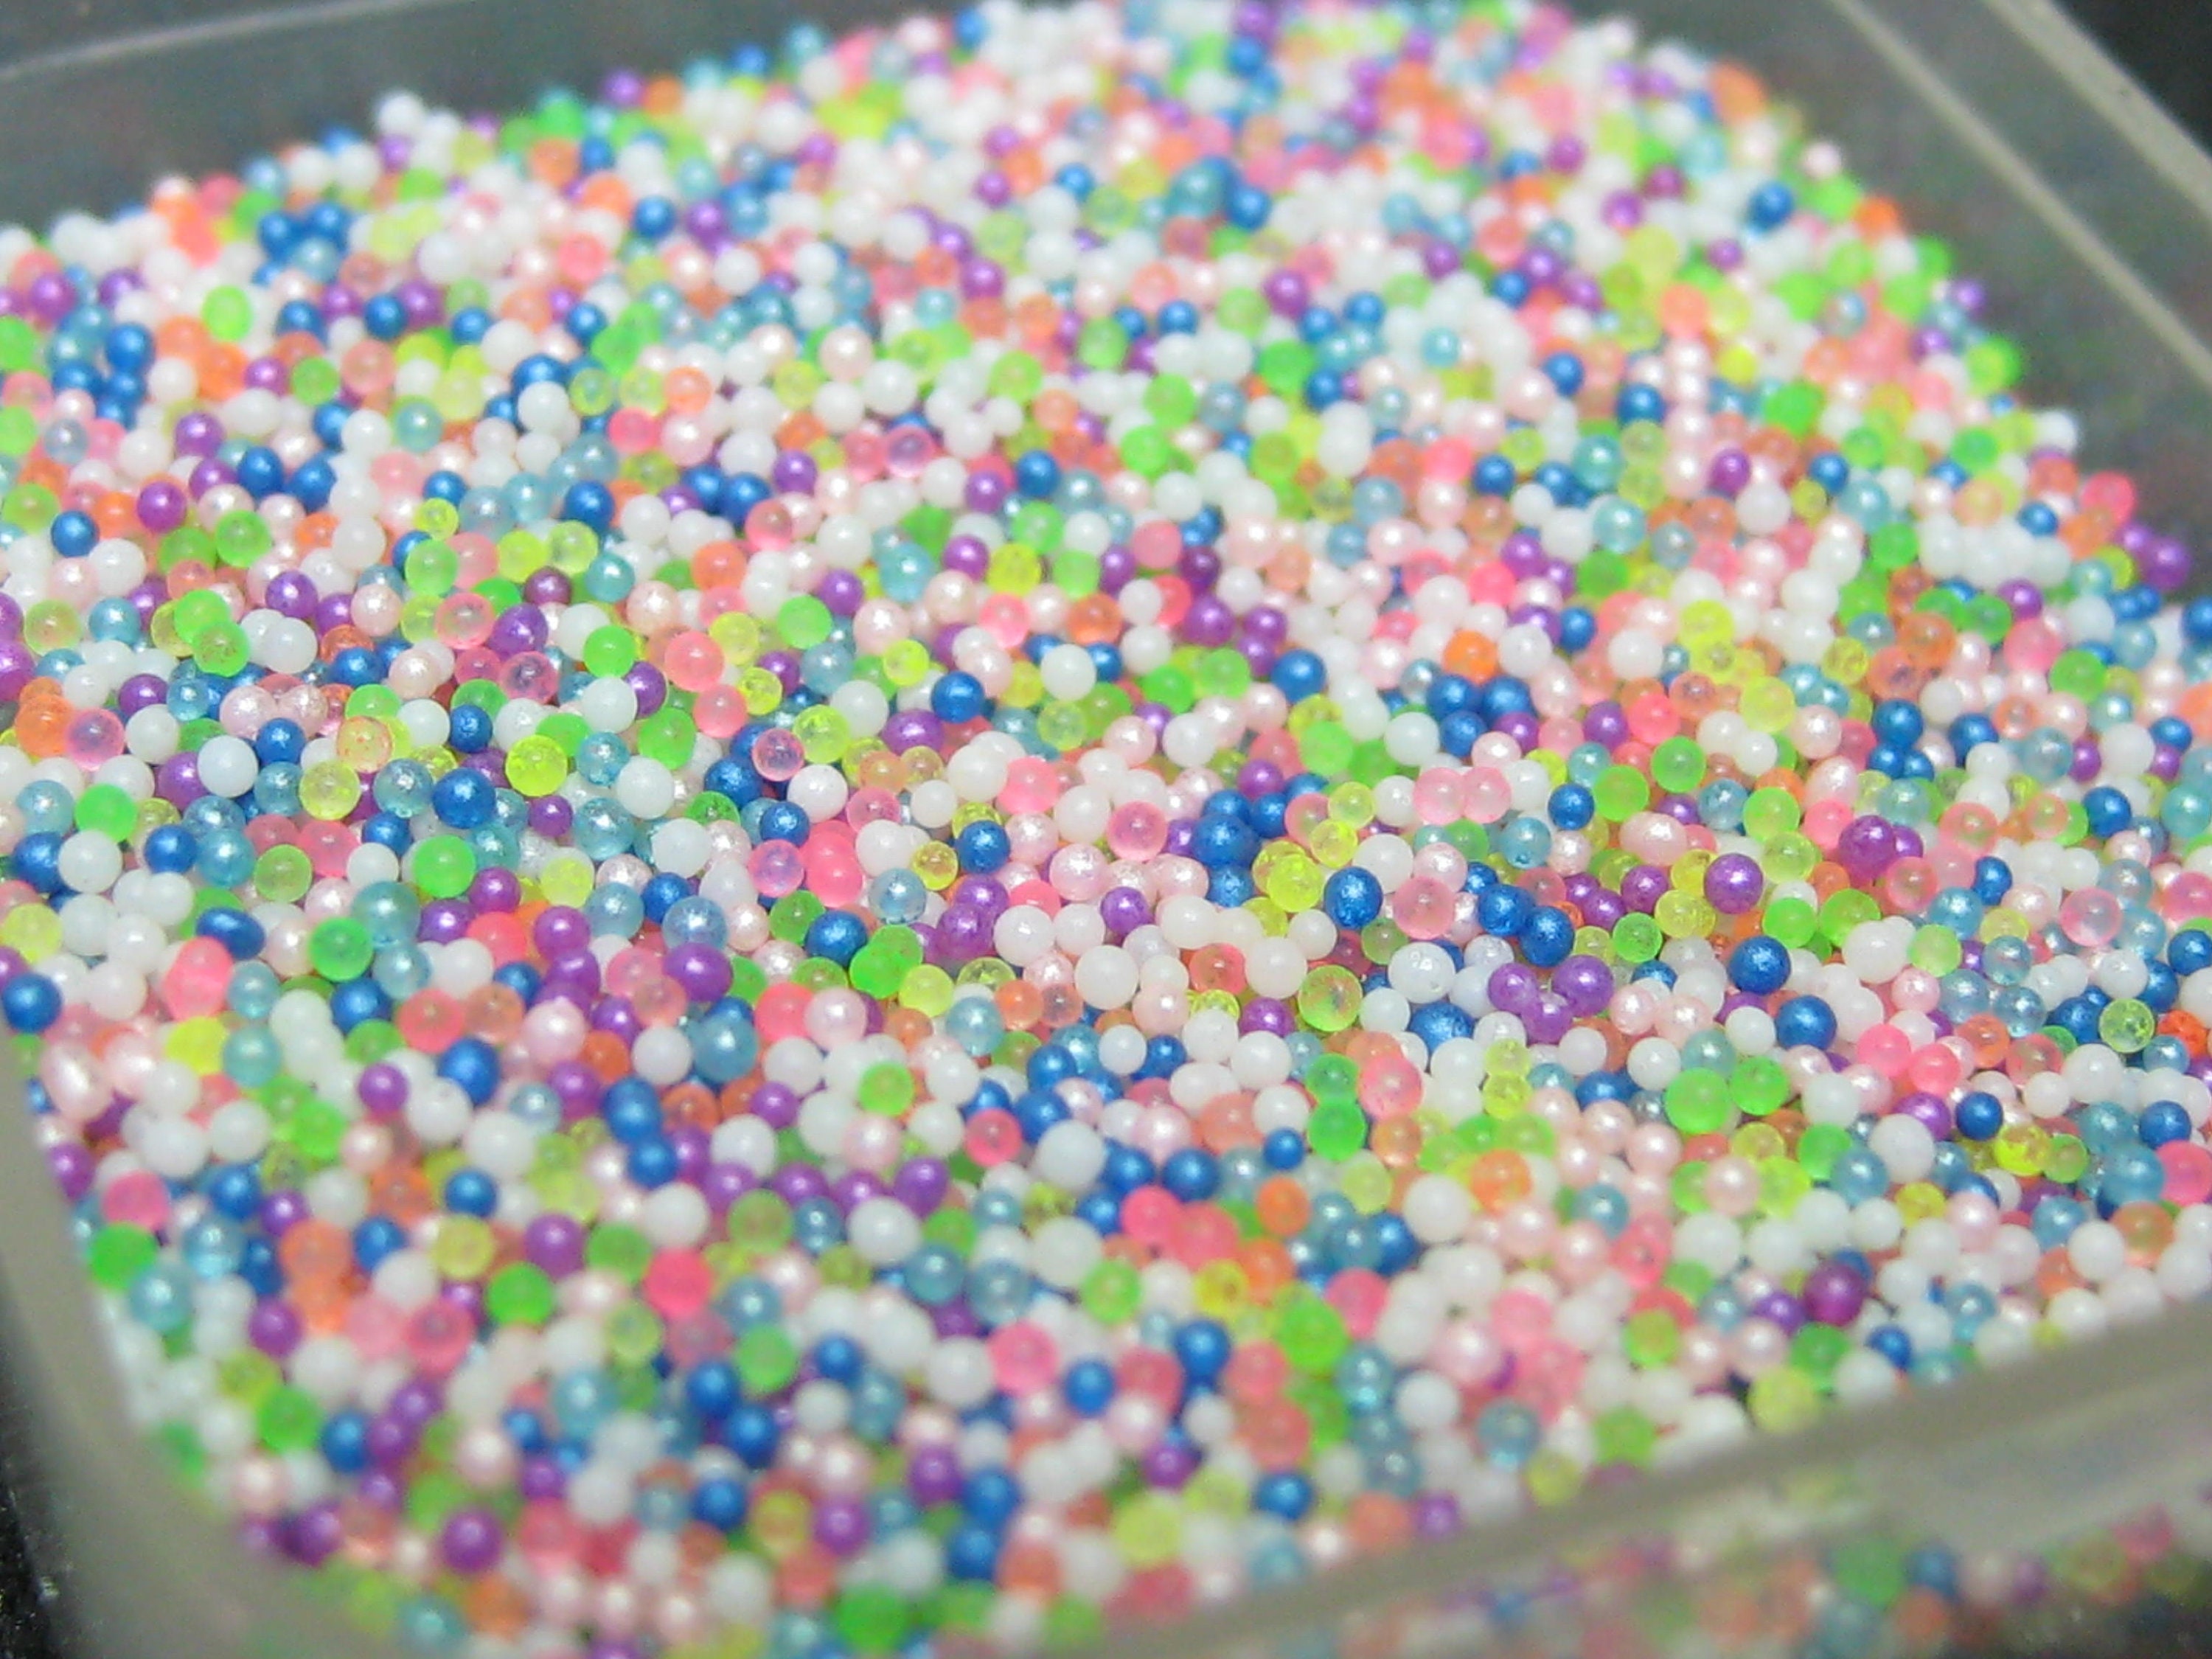 Romantic Snowflake Sprinkles with Pearls and Rhinestones | Faux Sweet  Decoration | Fake Toppings | Sweets Deco (Mix / 10 grams)